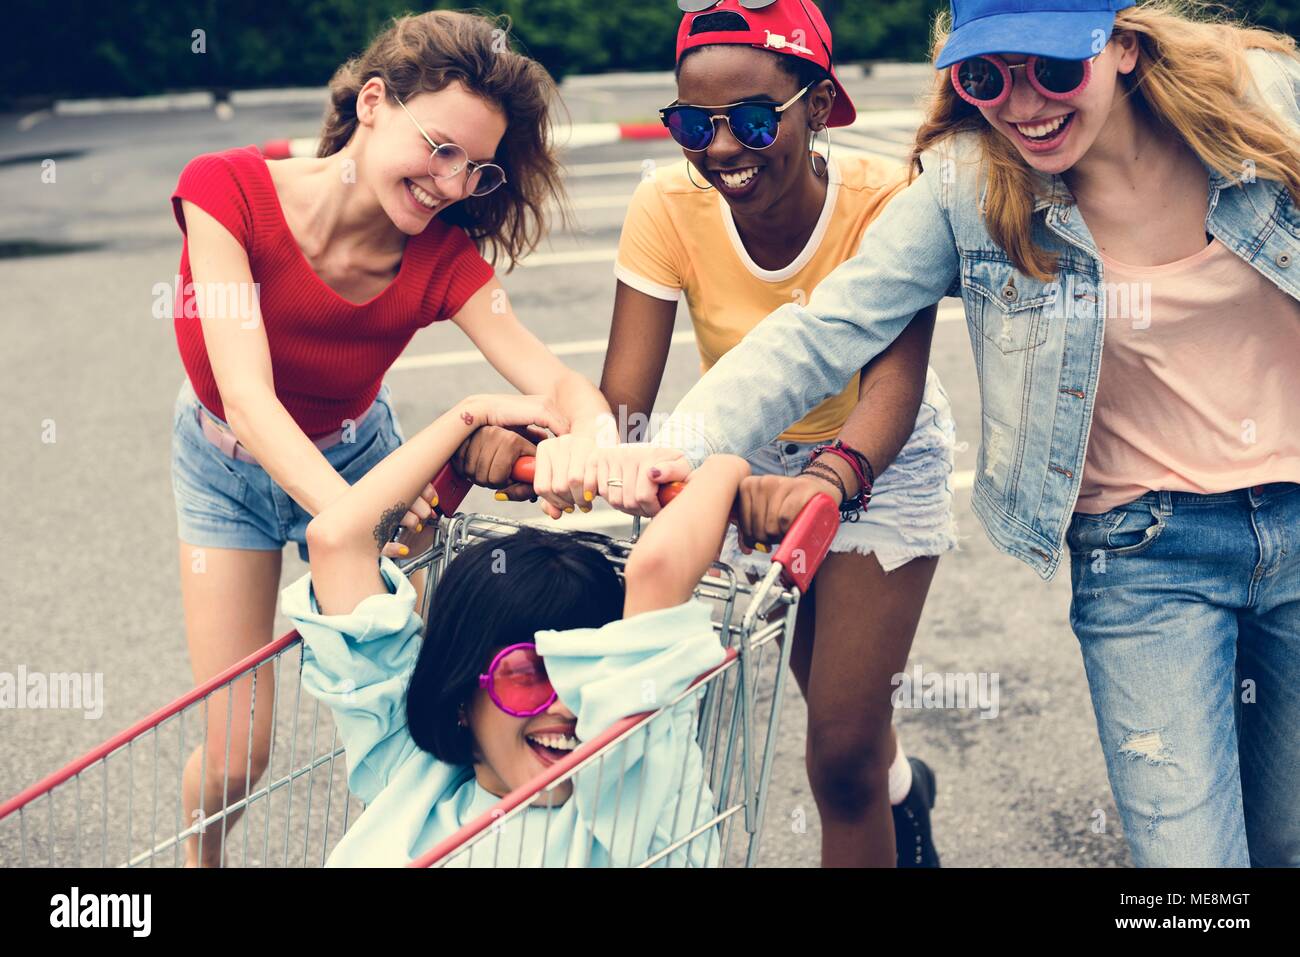 A group of diverse woman friends having fun together Stock Photo